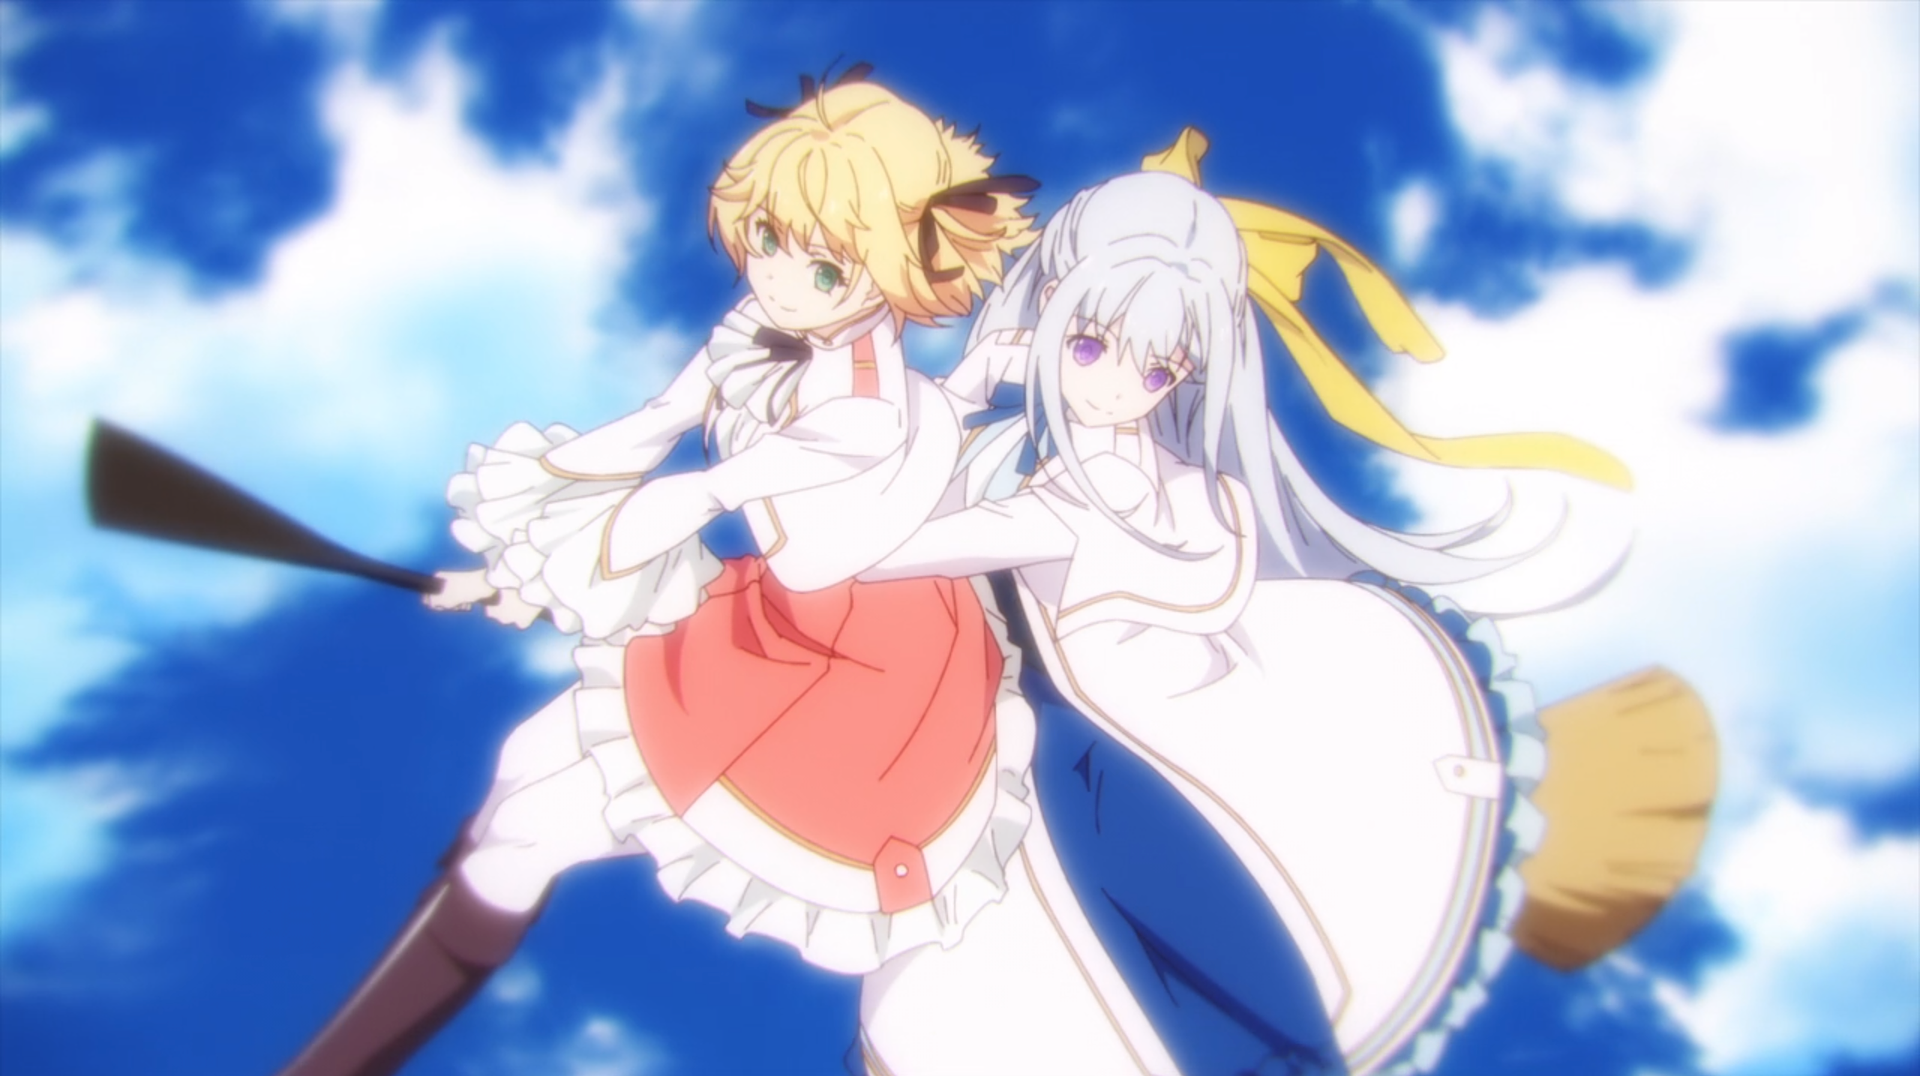 Screenshot from the OP of The Magical Revolution of the Reincarnated Princess and the Genius Young Lady. The two main characters are riding a broom across the sky.